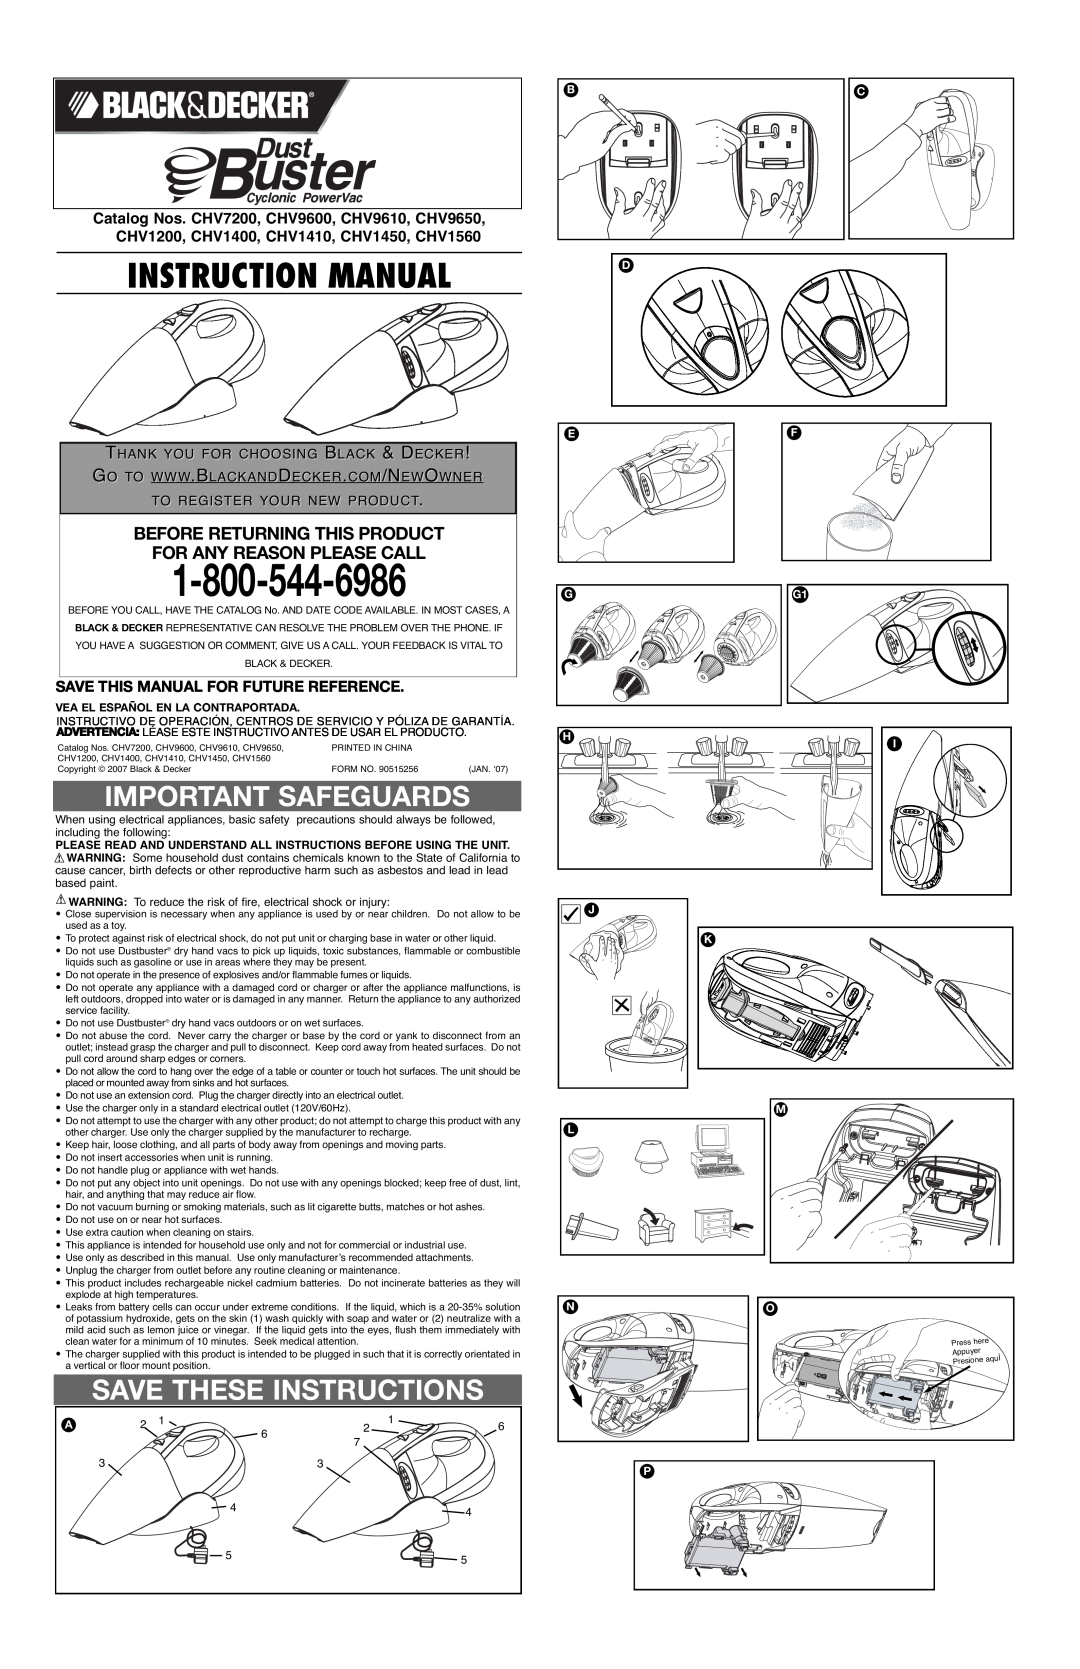 Black & Decker CHV9650 instruction manual Important Safeguards, Save These Instructions, To Register Your New Product 